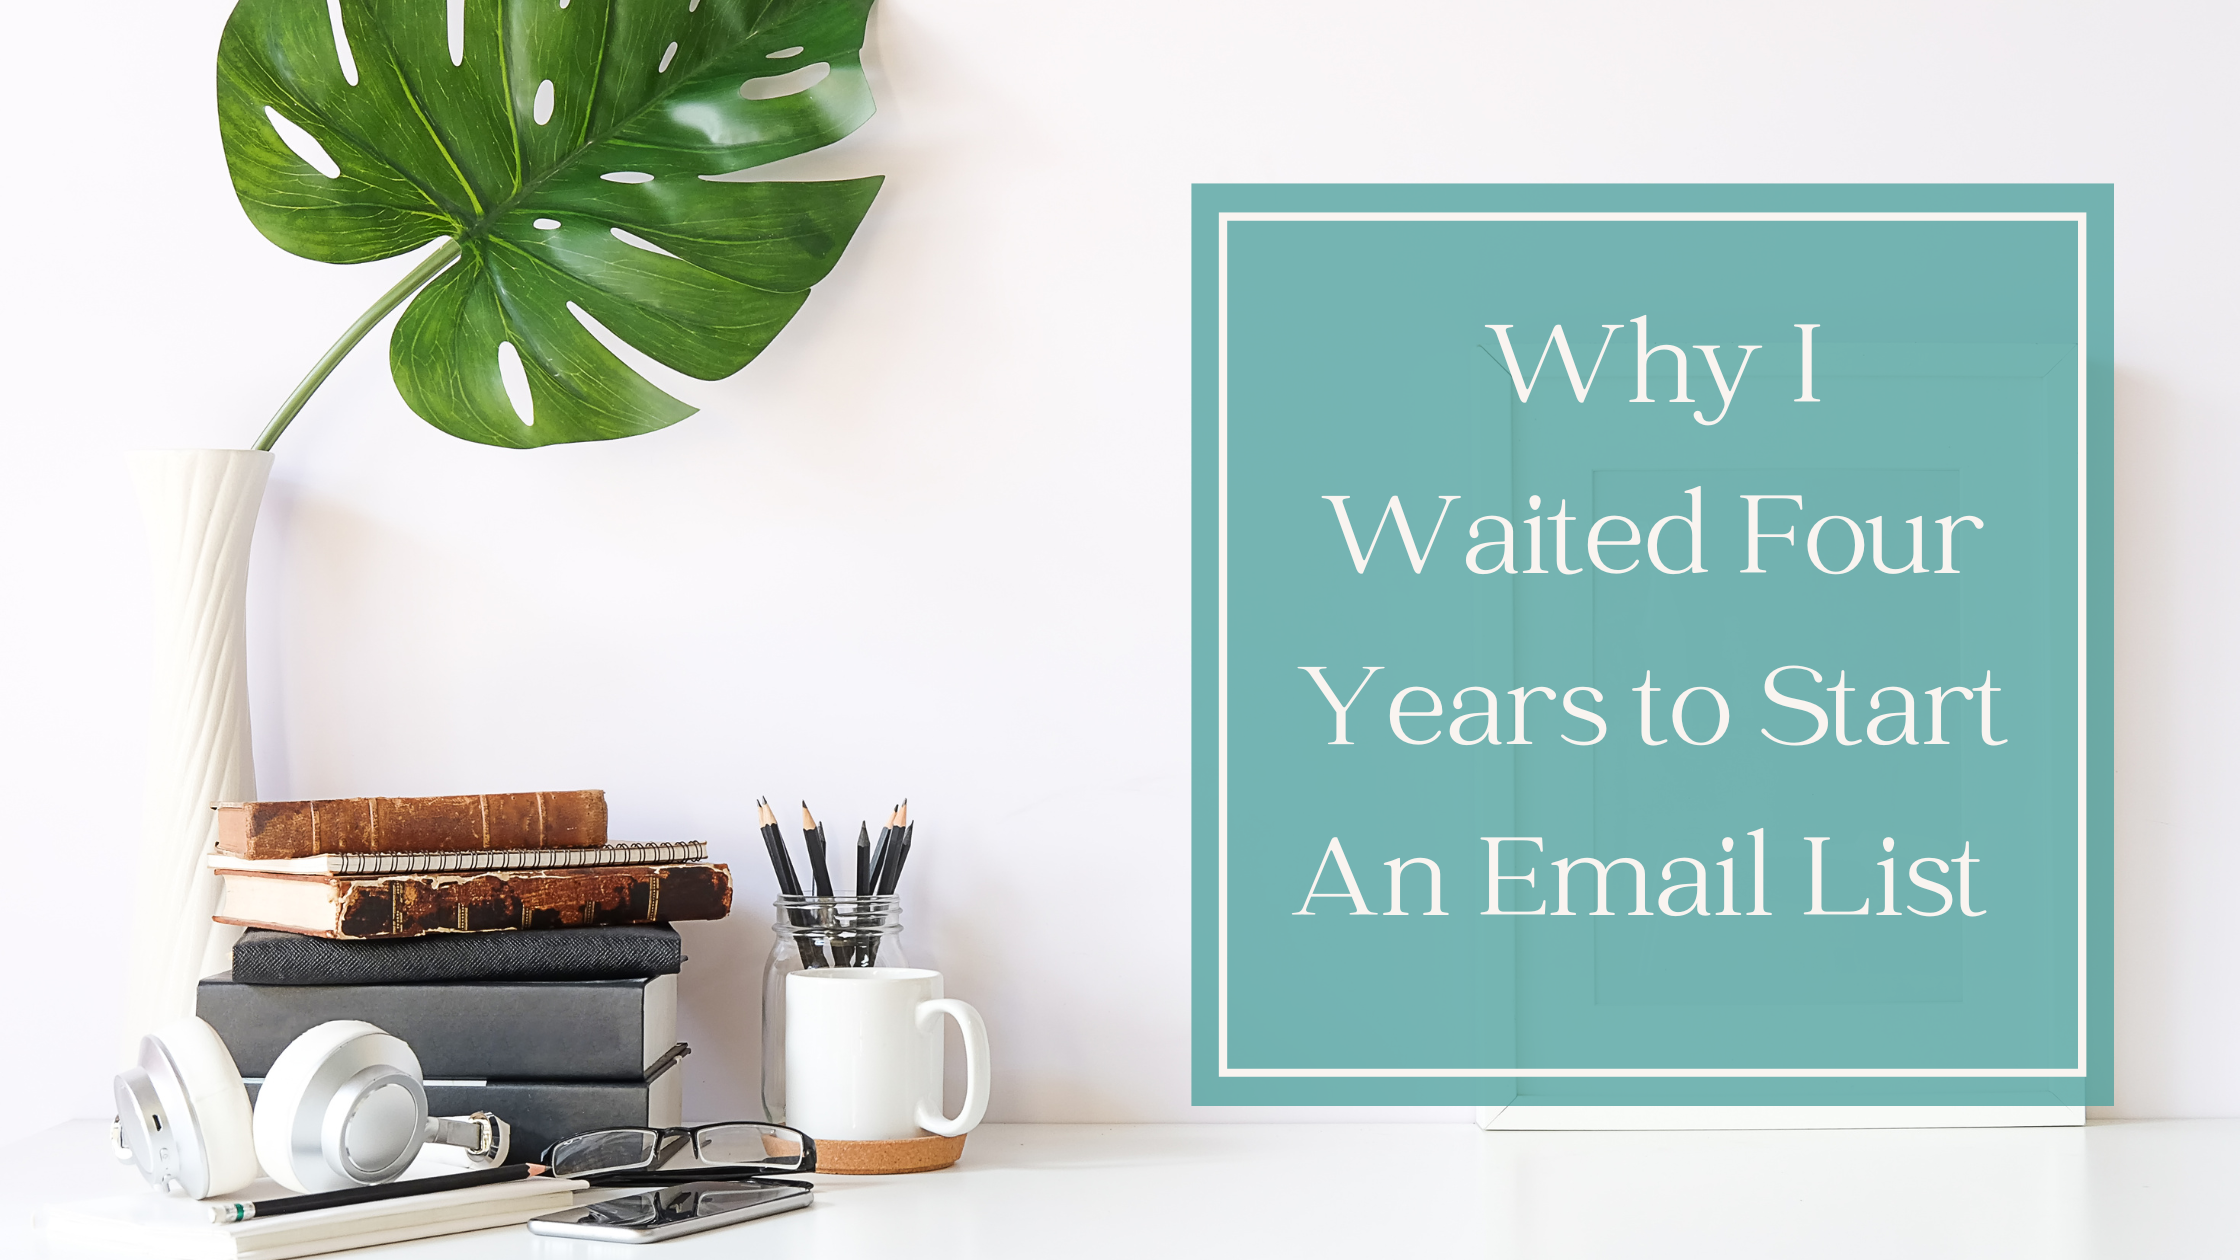 Why I Waited Four Years to Start An Email List